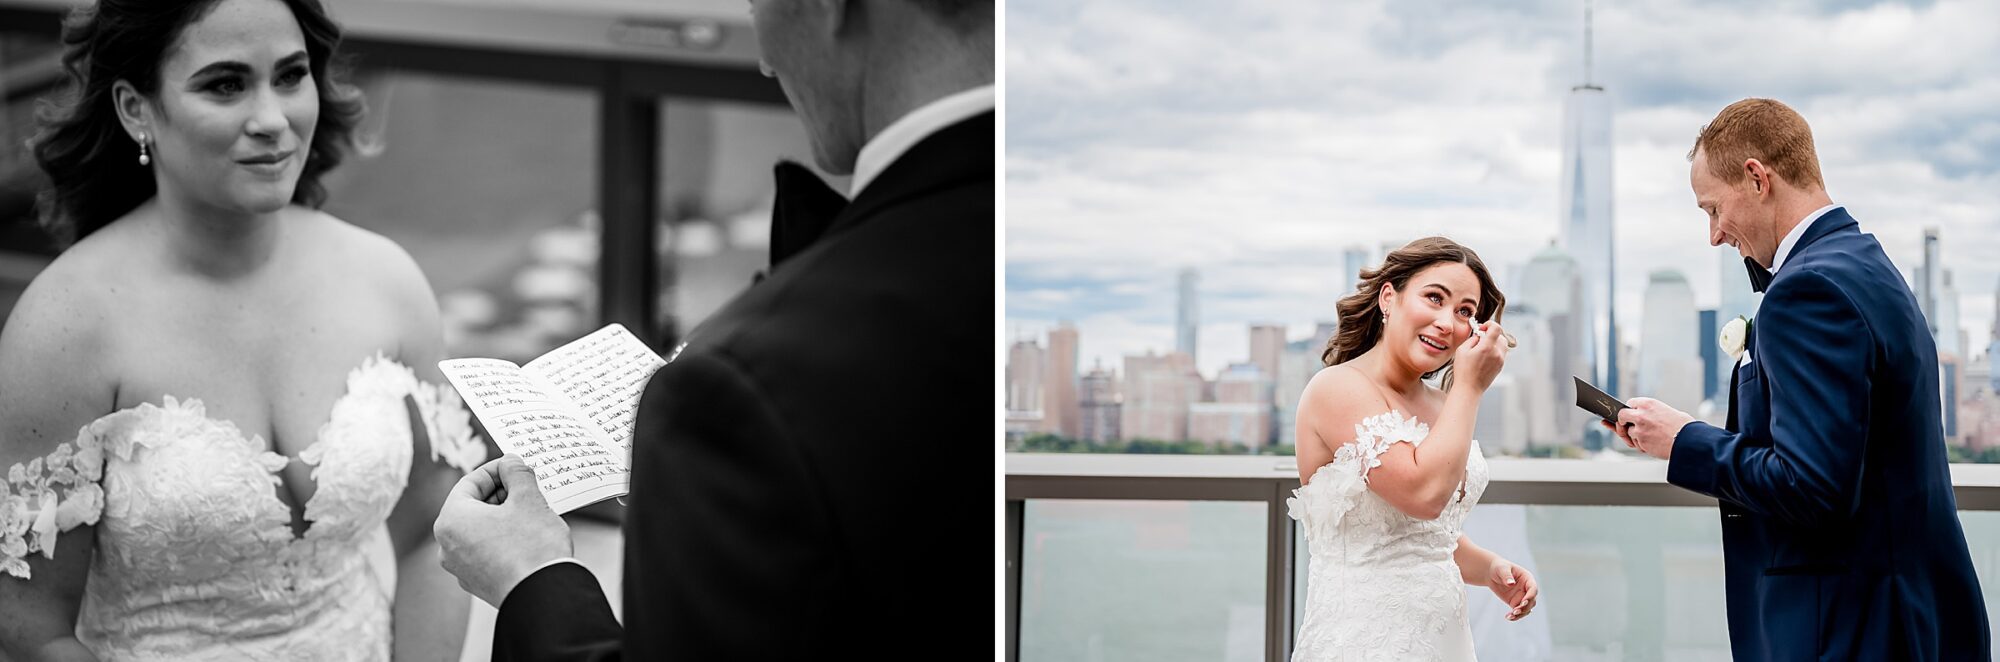 A bride and groom look at each other in front of a city skyline.